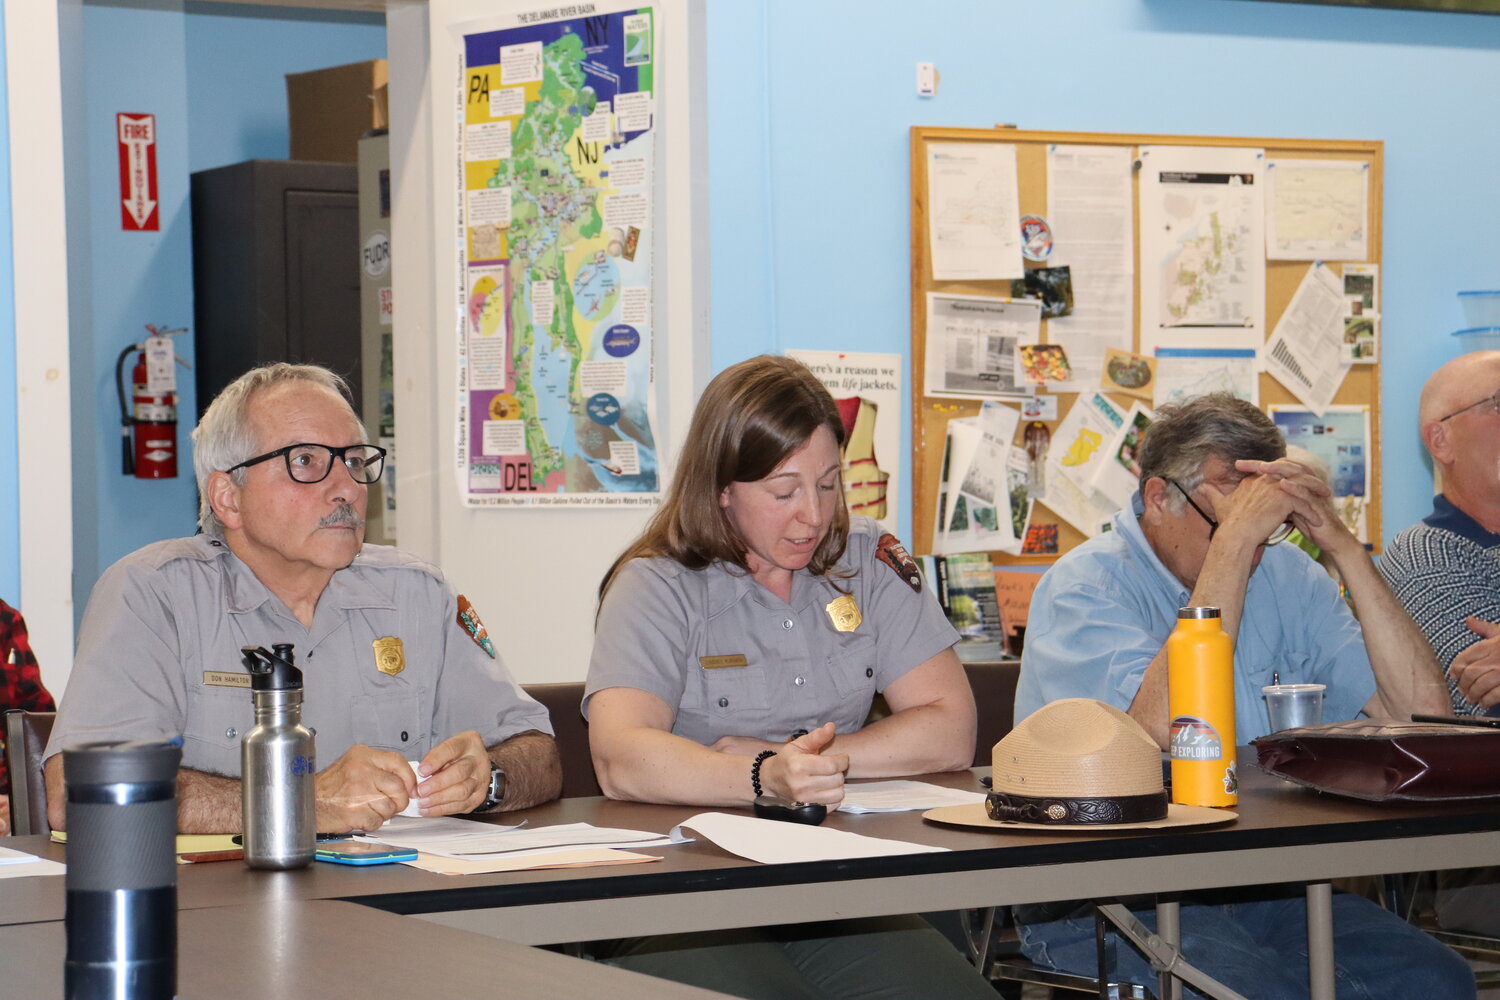 If no compromise can be found, the NPS needs to stand firm on its determination that Camp FIMFO, a cookie-cutter brand with no ties to the Upper Delaware, is not in substantial compliance.